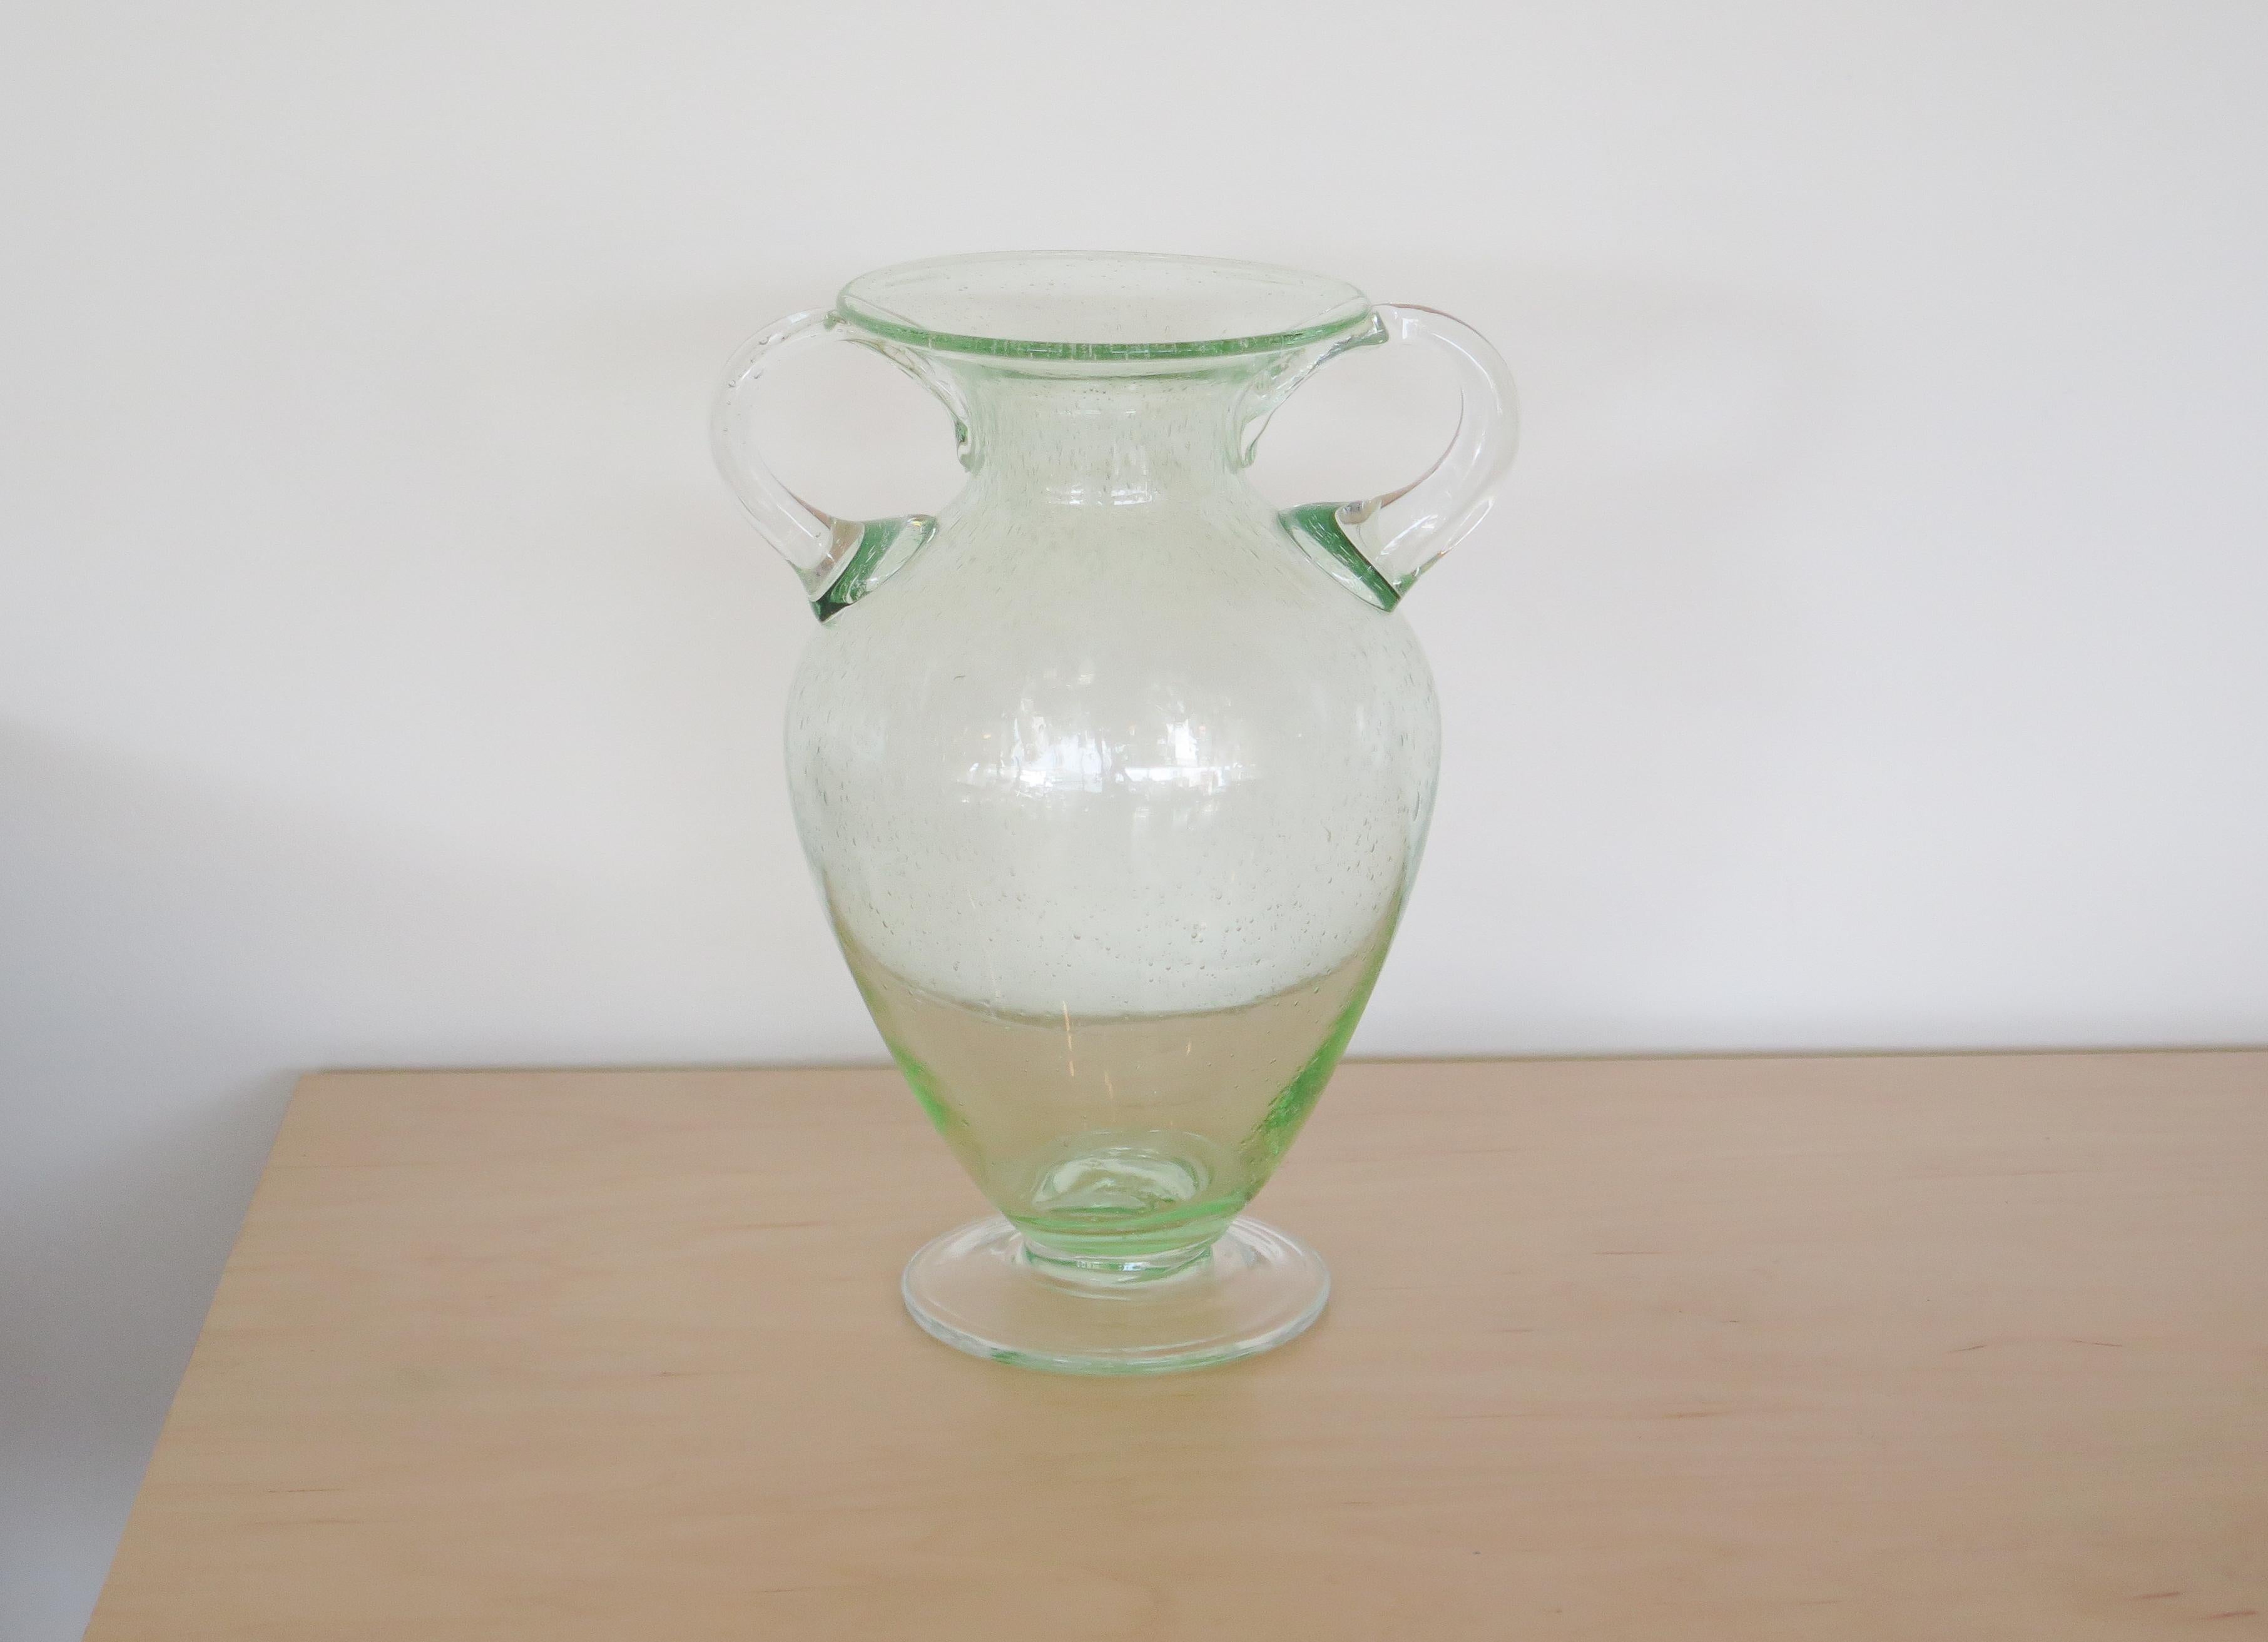 Vintage hand blown glass vase from Murano, Italy in a translucent sea foam green. Beautiful urn shape with two handles. Excellent vintage condition.